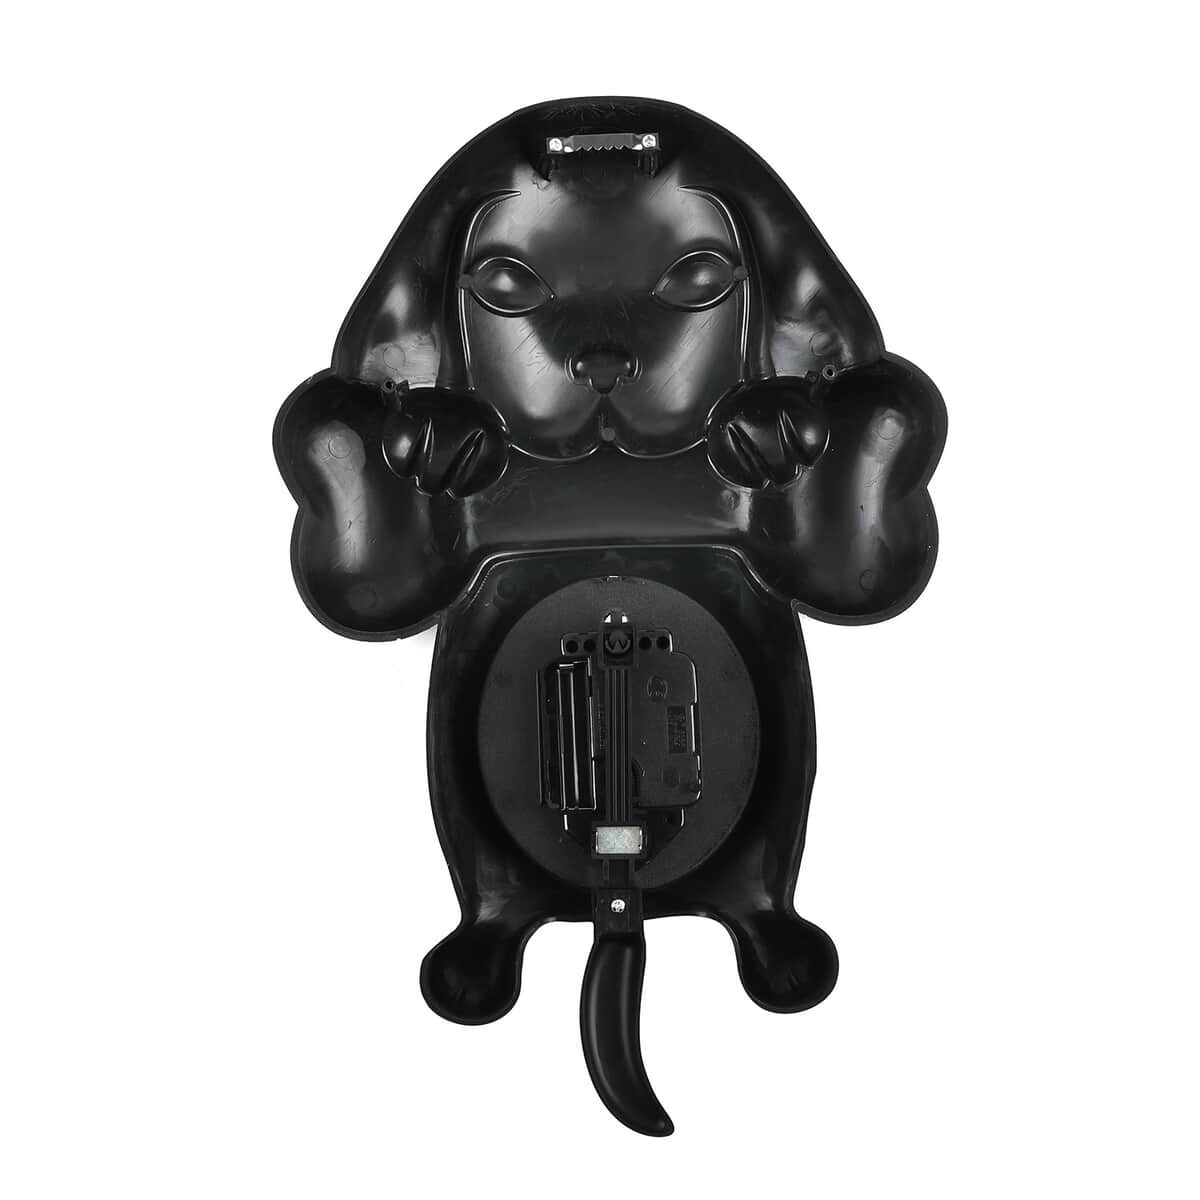 Black Dog Shaped Wall Clock with Moving Tail (14.17"x9.37"x2.51") (1xAA Battery Not Included) image number 1